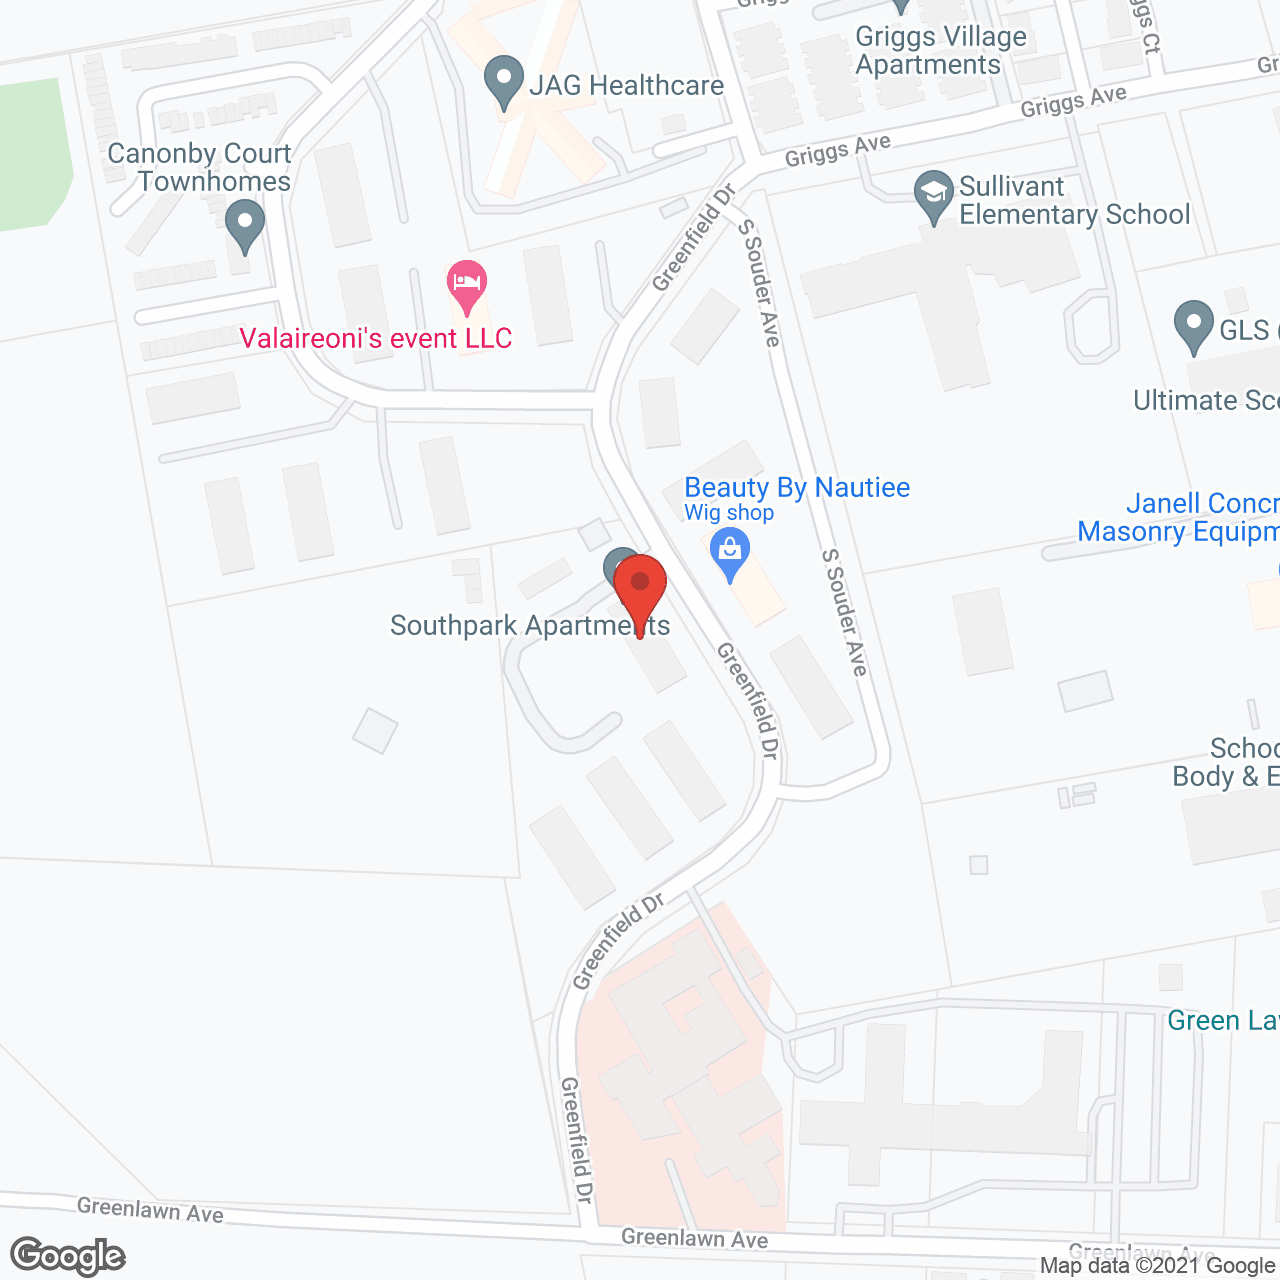 Southpark Apartments in google map